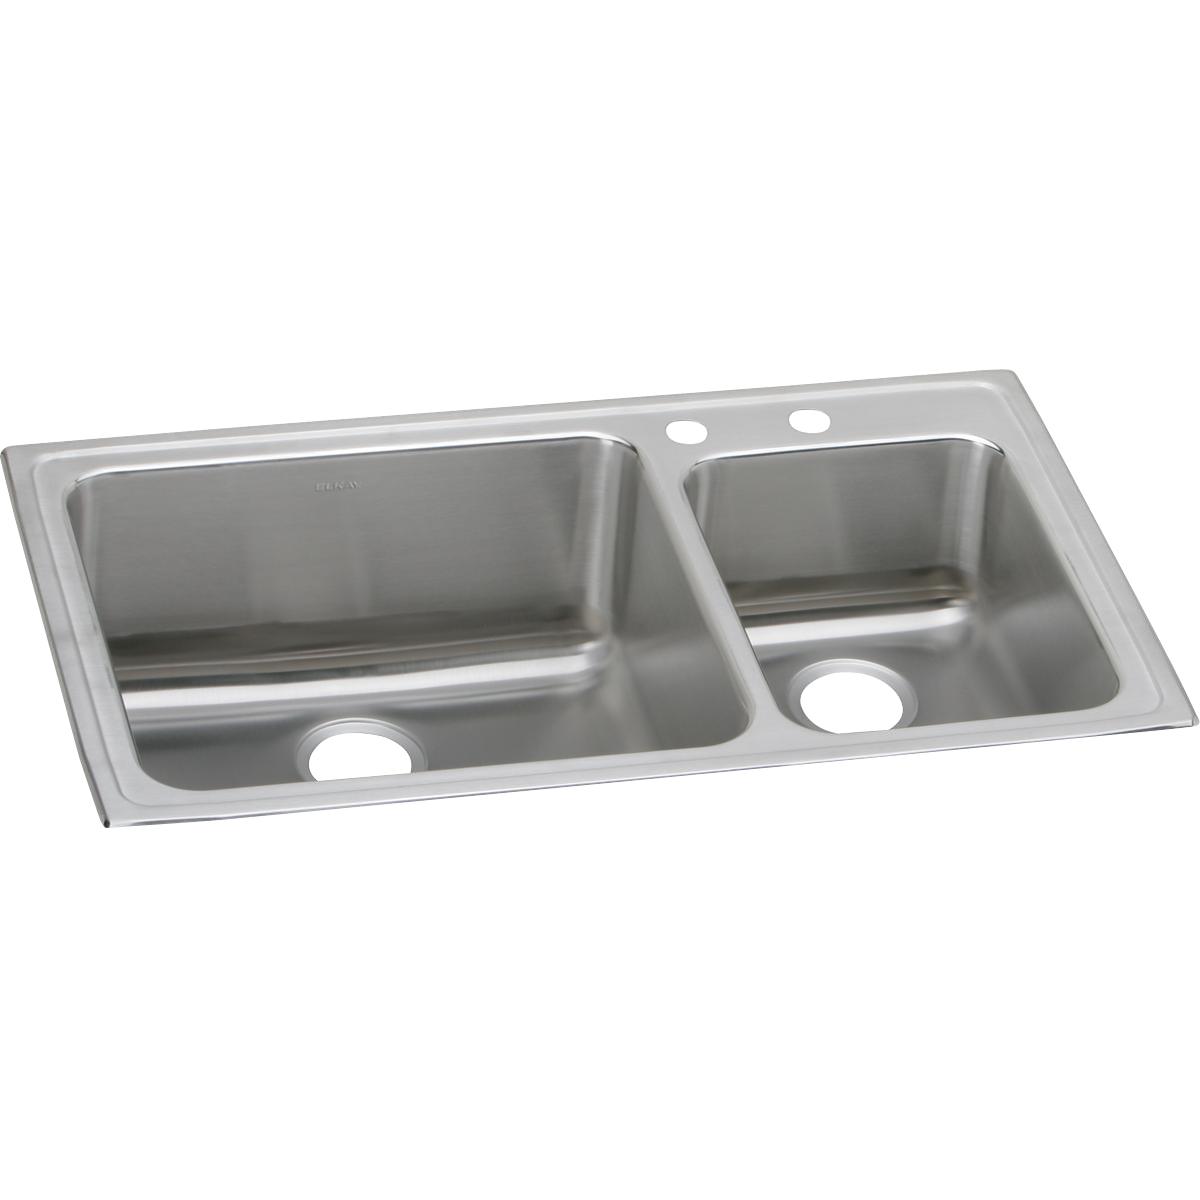 Elkay Lustertone Classic Stainless Steel 37" x 22" x 10", 2-Hole 60/40 Double Bowl Drop-in Sink